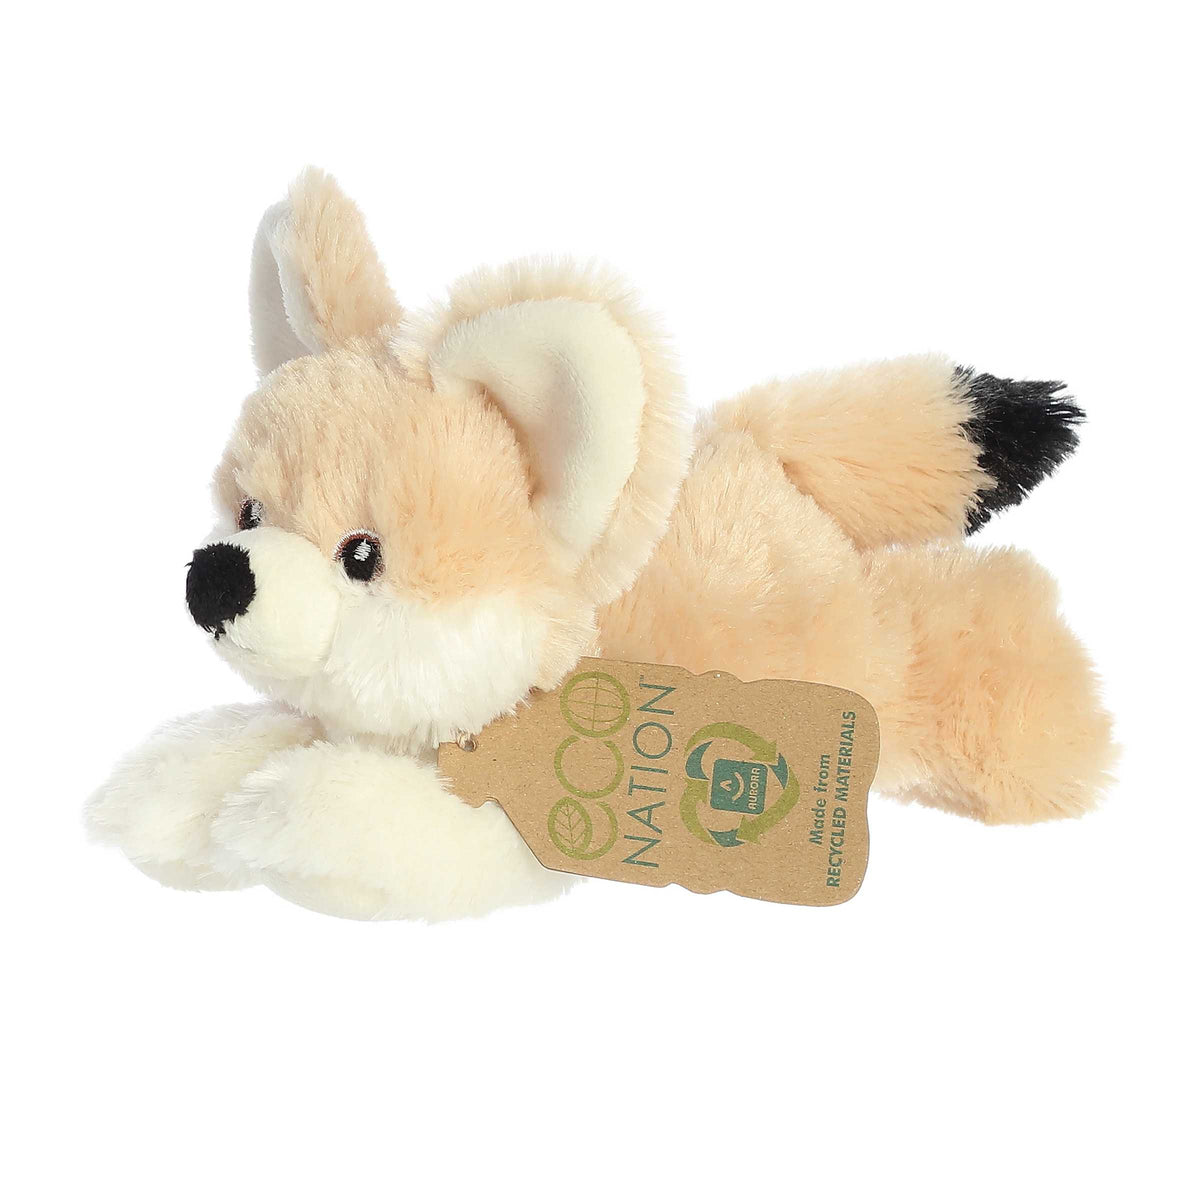 Eco Softie Fennec Fox Plush by Aurora, featuring large ears and a cream-and-tan coat, with a black-tipped tail!